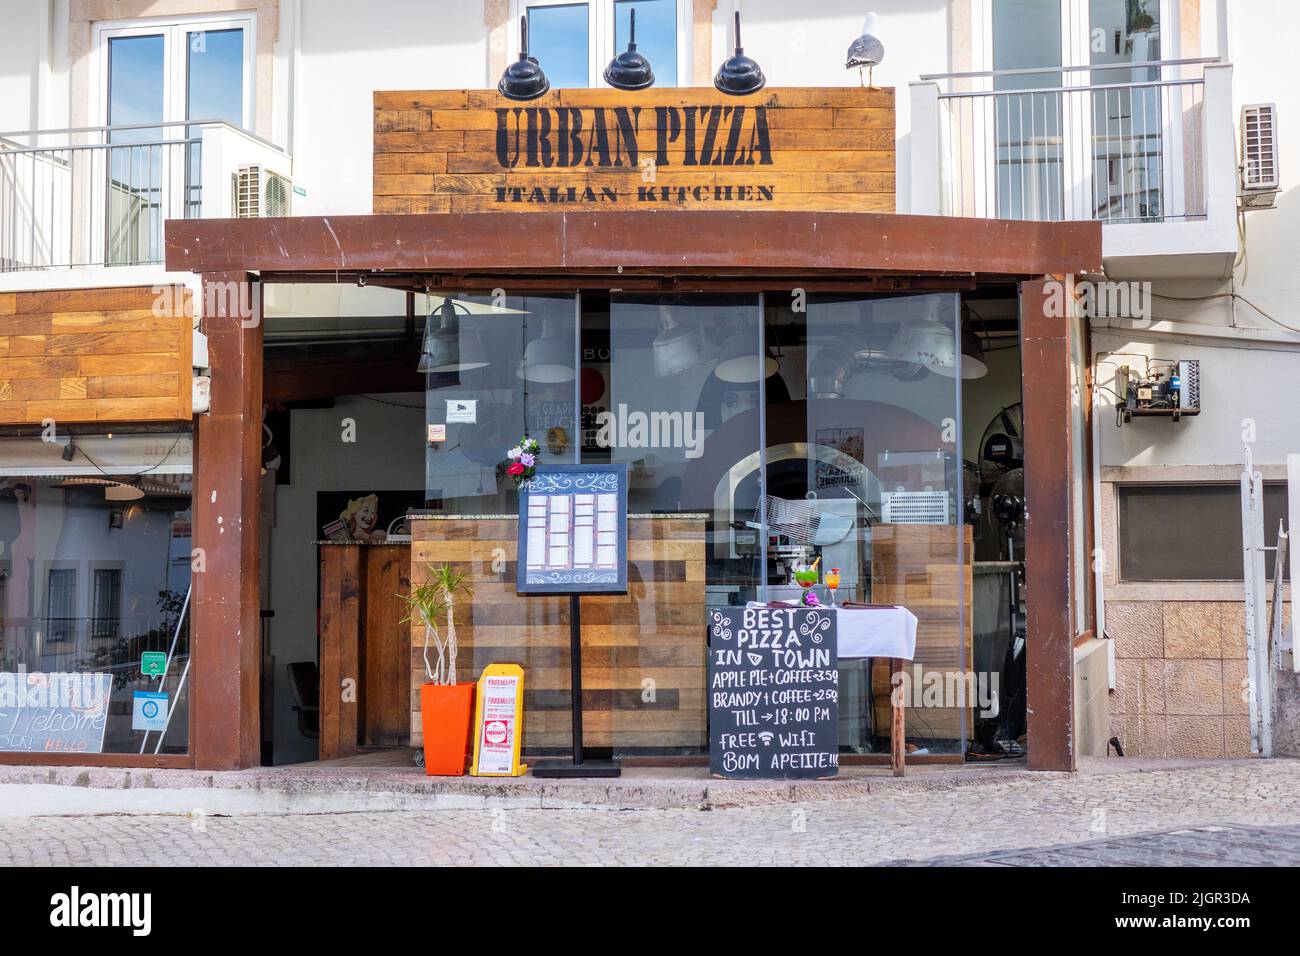 Urban Pizza Restaurant In Albufeira Old Town Advertising On A Chalk Board  Sign Best Pizza In Town Outside The Restaurant Menu Sign Has Prices Of Popu Stock Photo